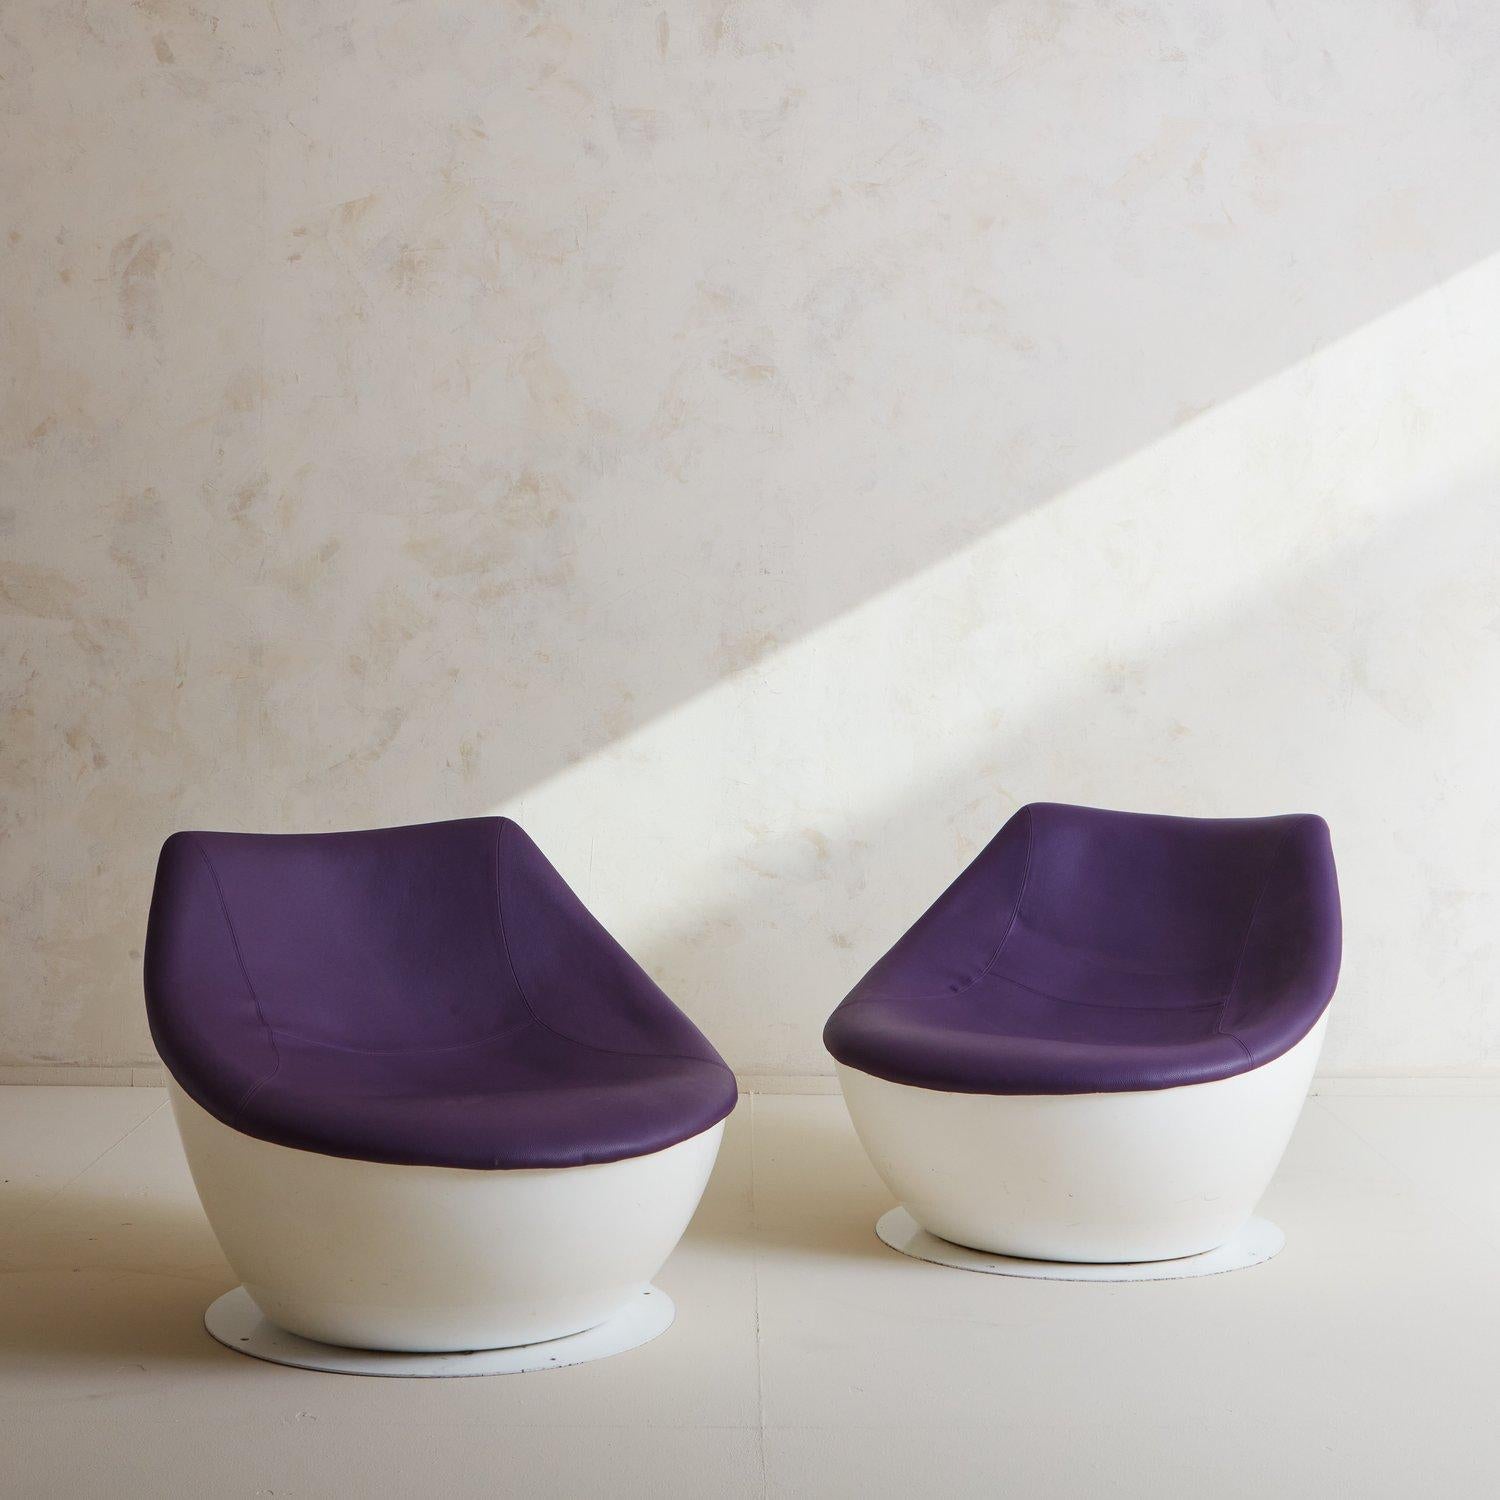 A pair of Orbital chairs designed by Christophe Pillet for Modus in 2008. These striking chairs feature rounded white fiberglass frames and retain their original purple vegan-leather upholstery. They stand on white circular aluminum bases. Imprinted